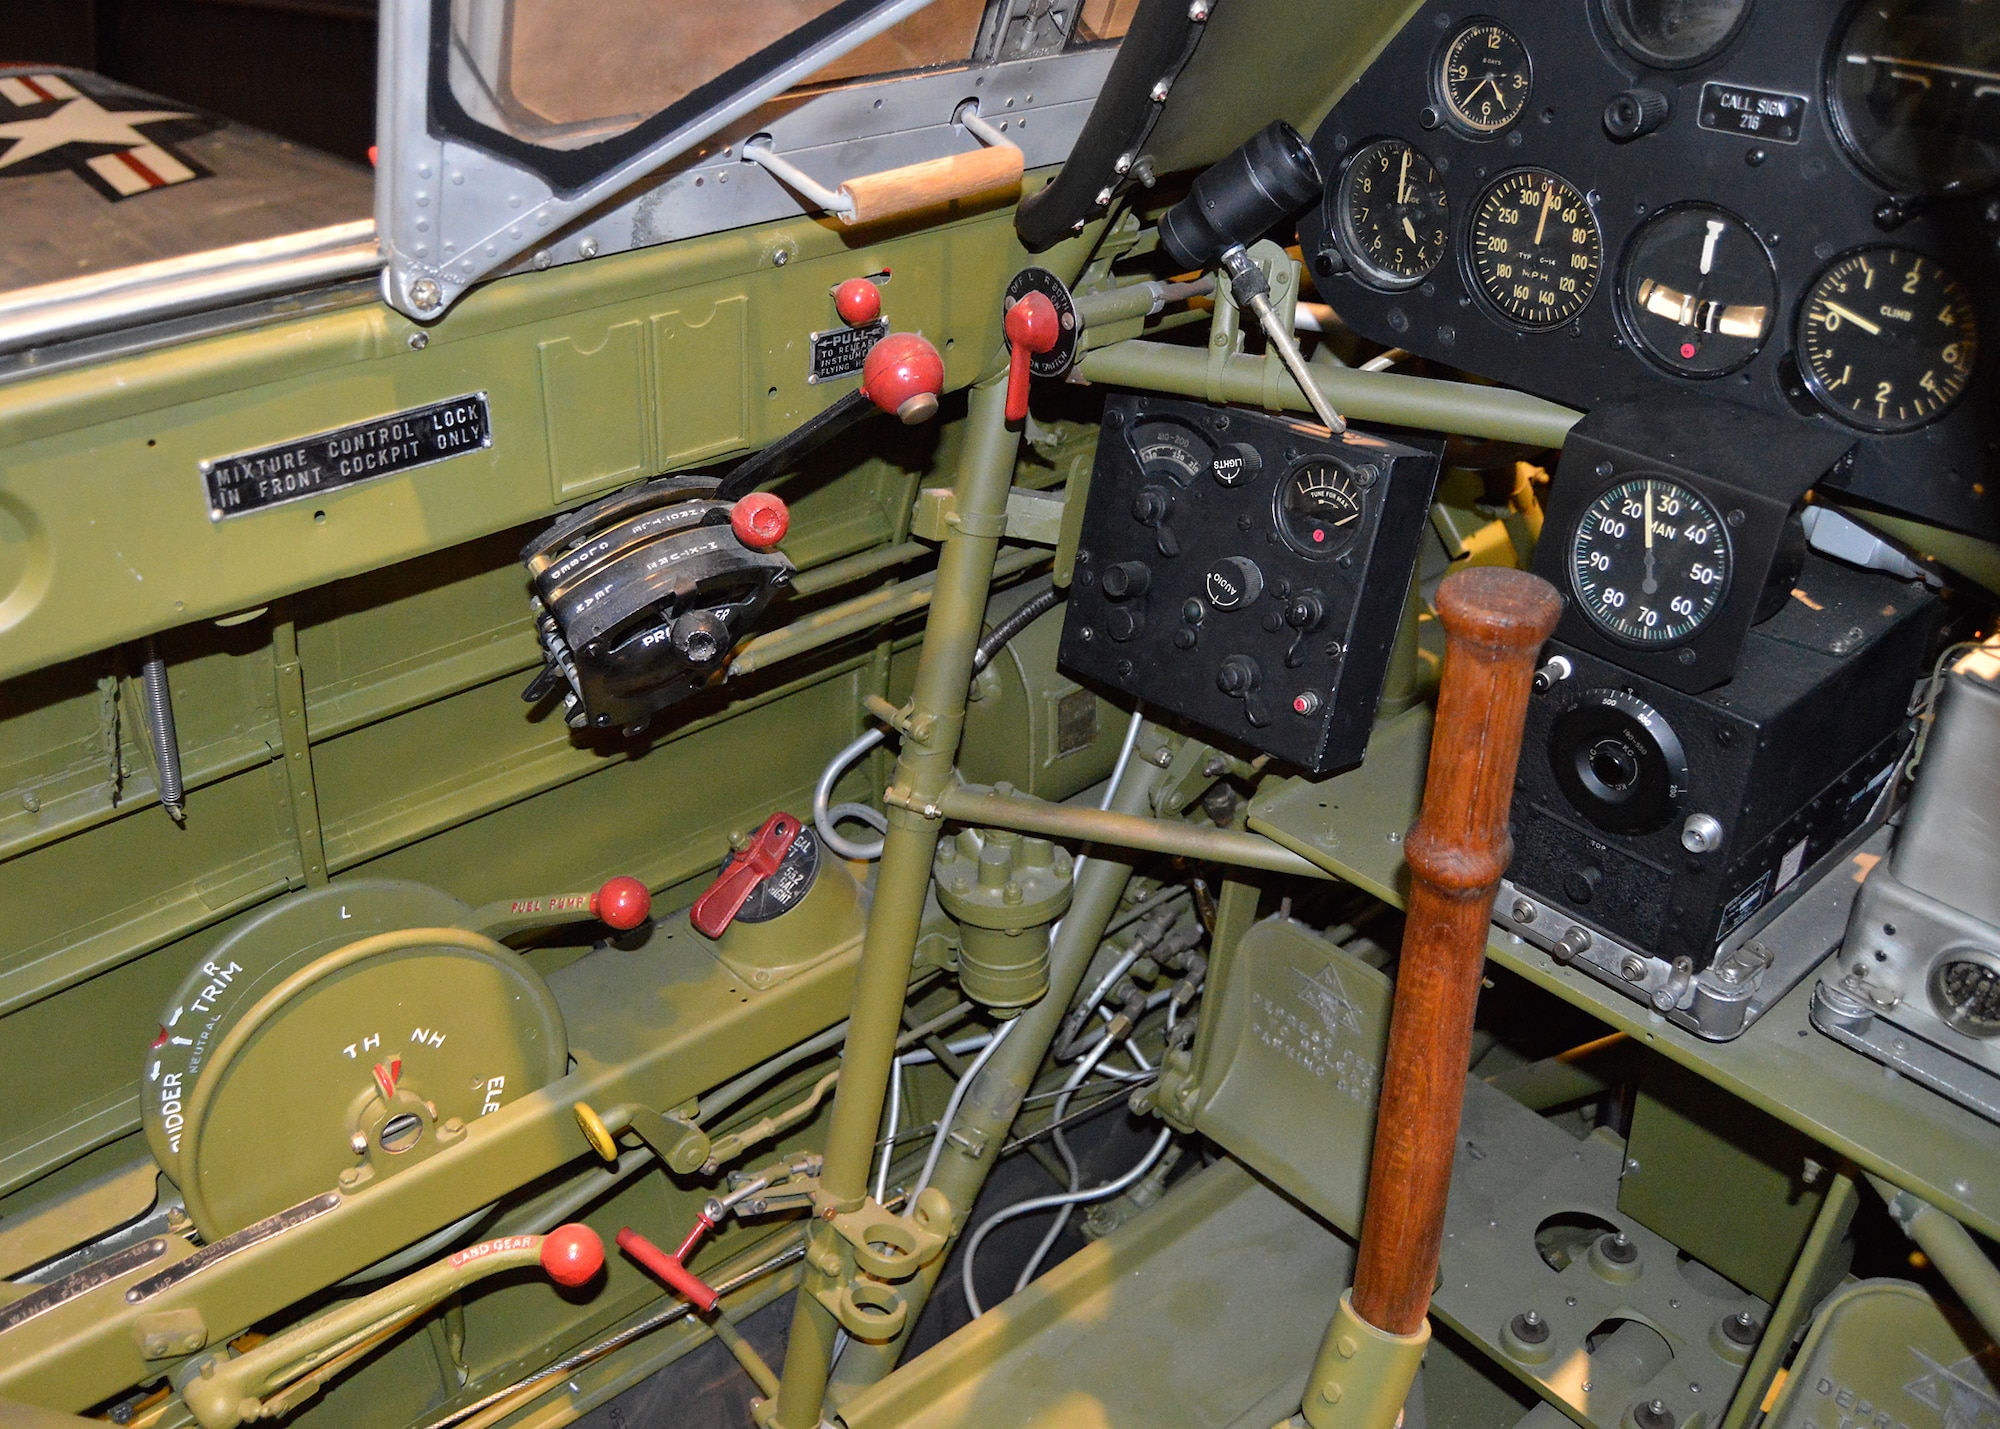 North American T-6D "Mosquito" rear cockpit in the Korean War Gallery at the National Museum of the United States Air Force. (U.S. Air Force photo by Ken LaRock)